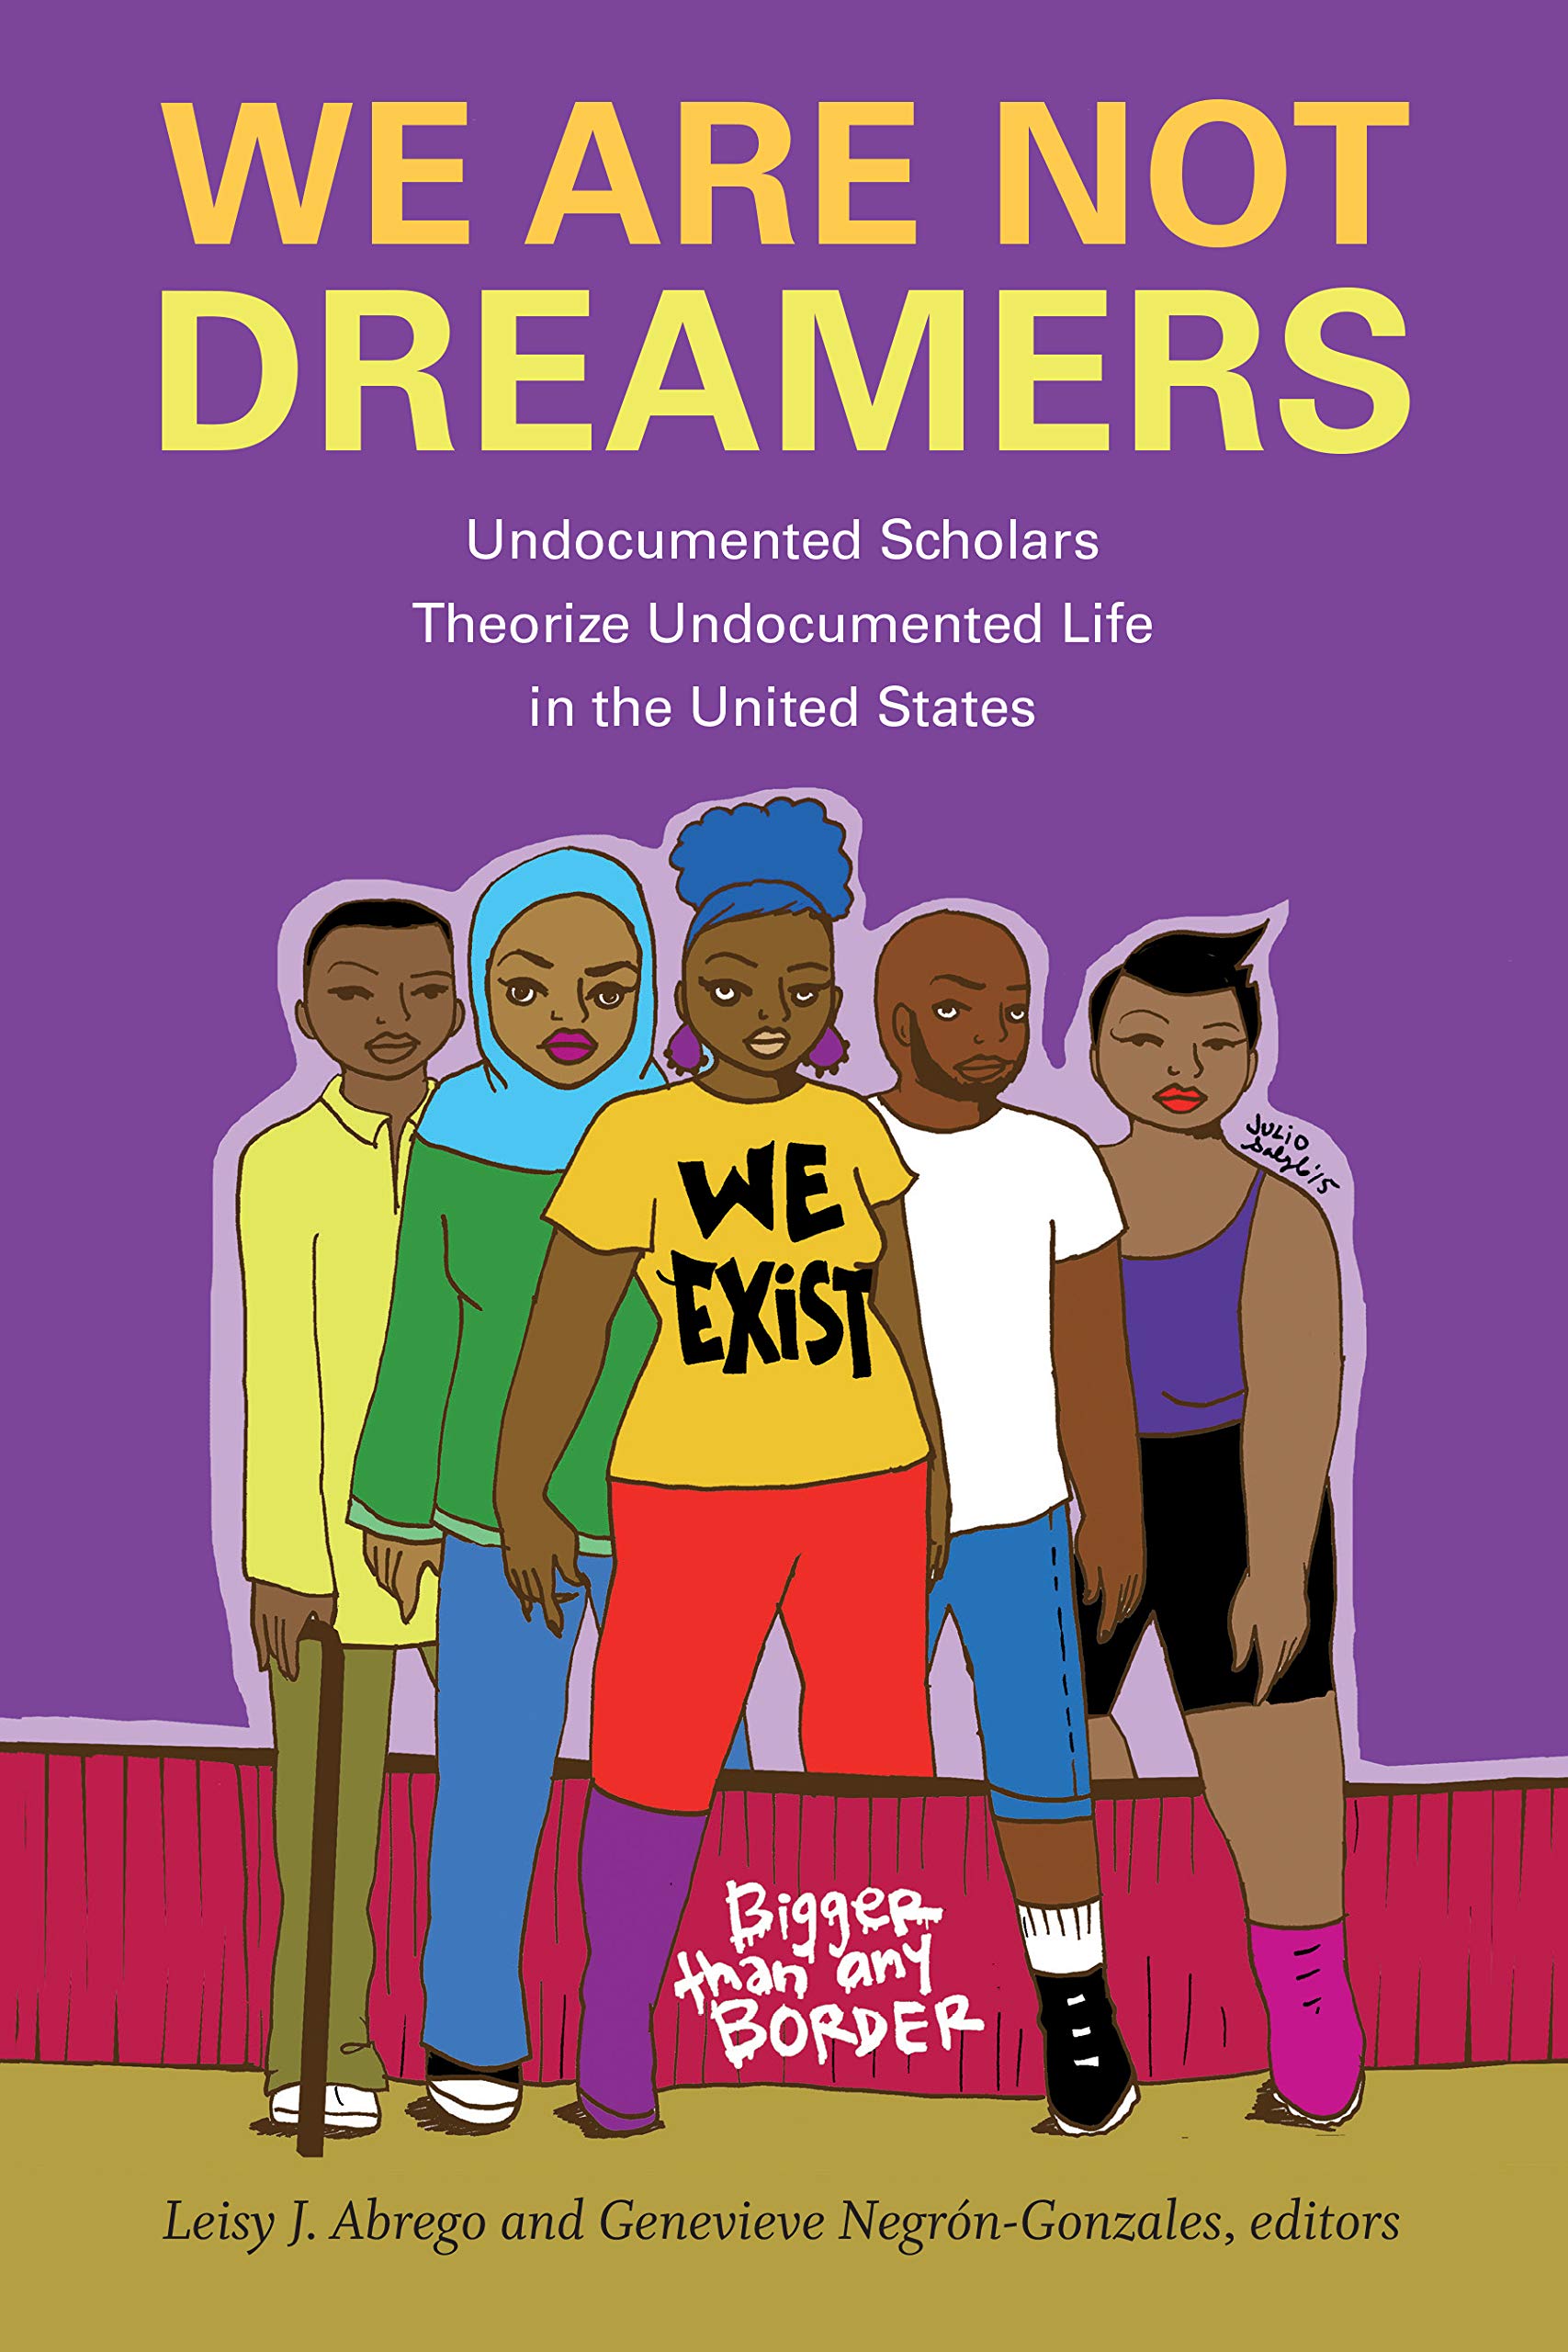 We Are Not Dreamers | Leisy J. Abrego, Genevieve Negron-Gonzales